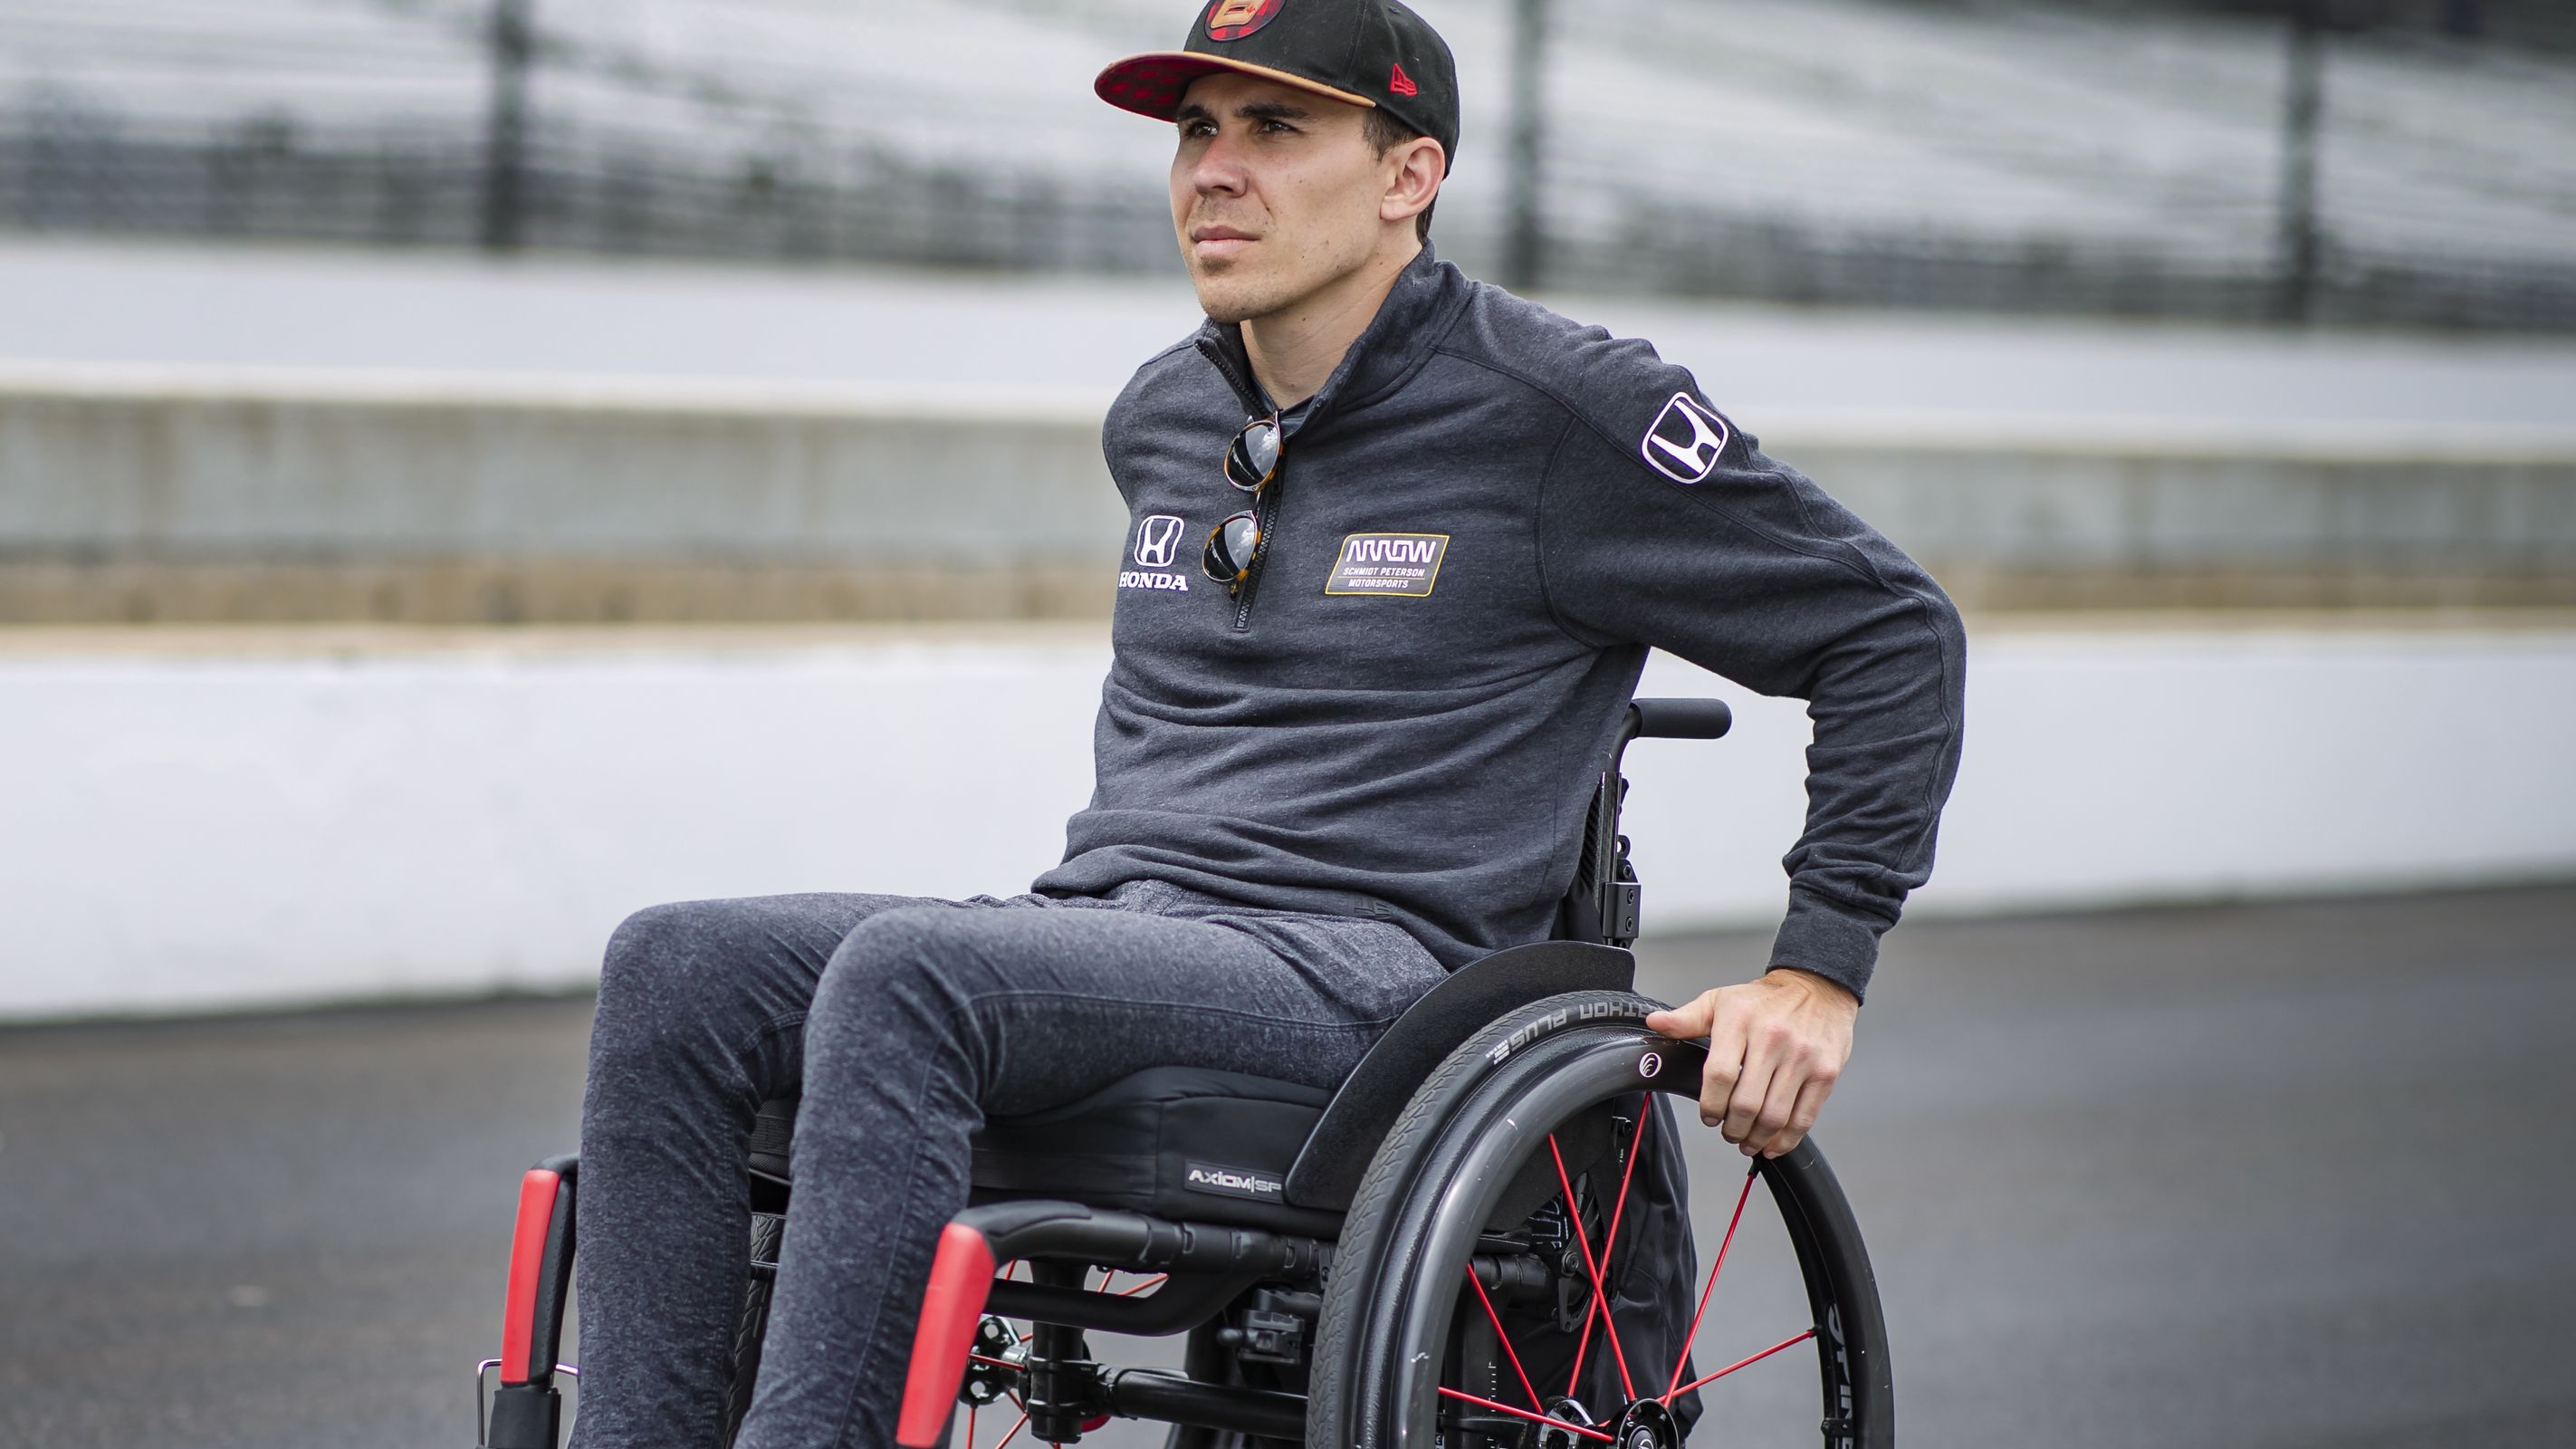 IndyCar driver Robert Wickens is seen in the pit area during qualifications for the Indy 500 at Indianapolis Motor Speedway in 2019.